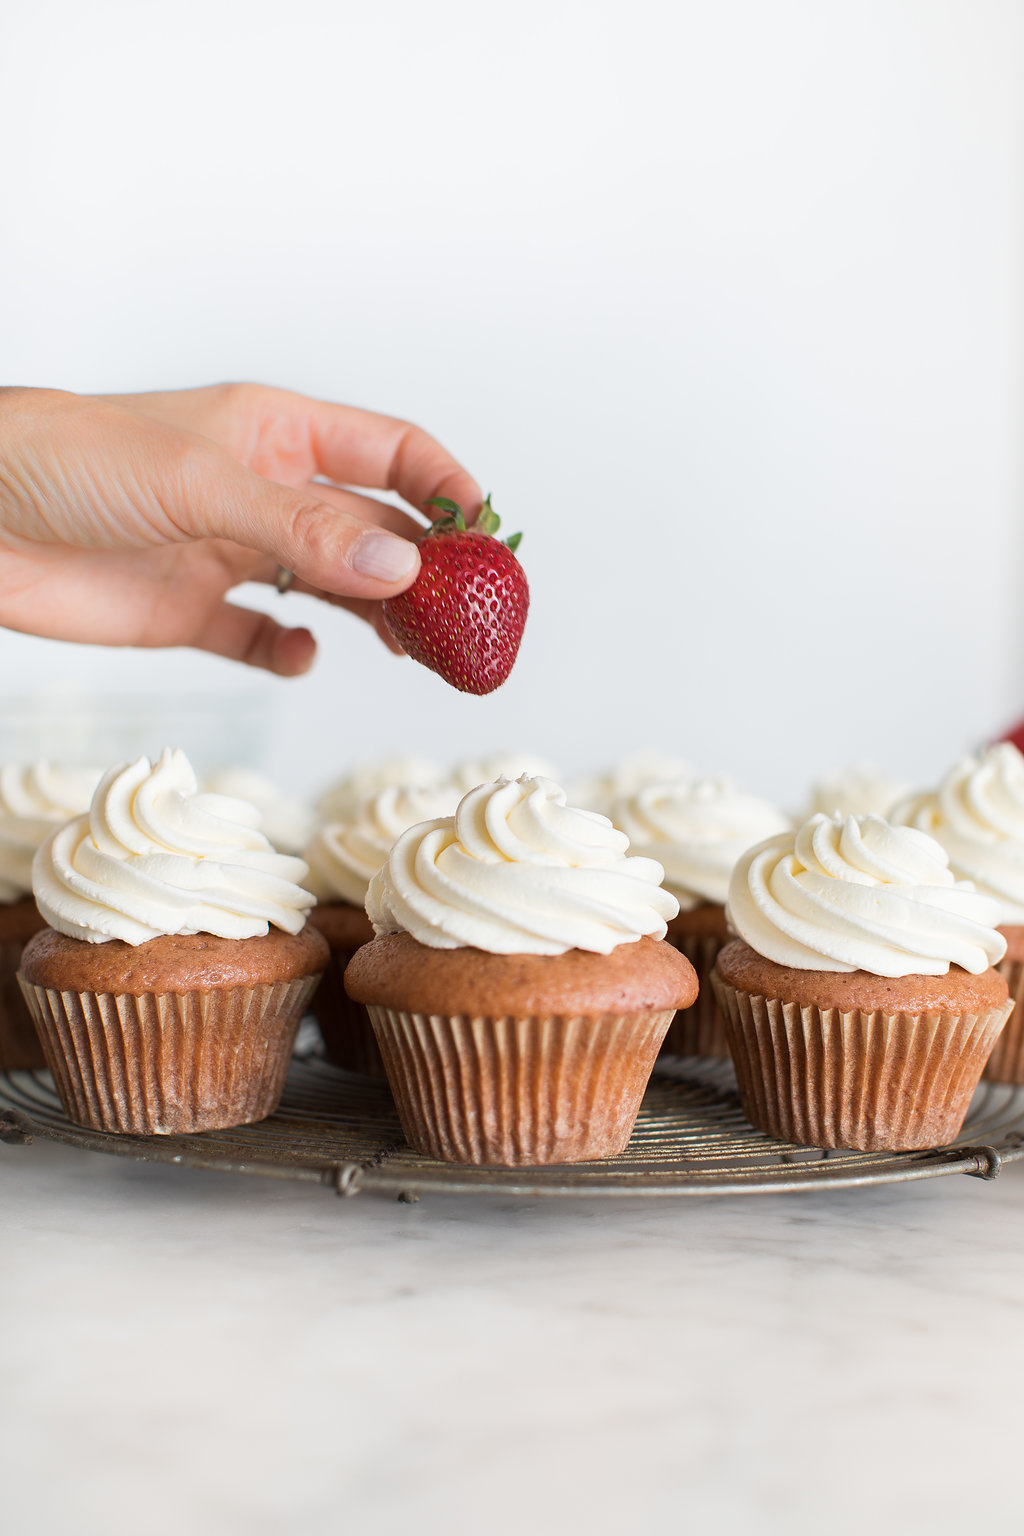 Fresh and beautiful Strawberries and Cream Cupcakes using real strawberries on fraichenutrition.com.